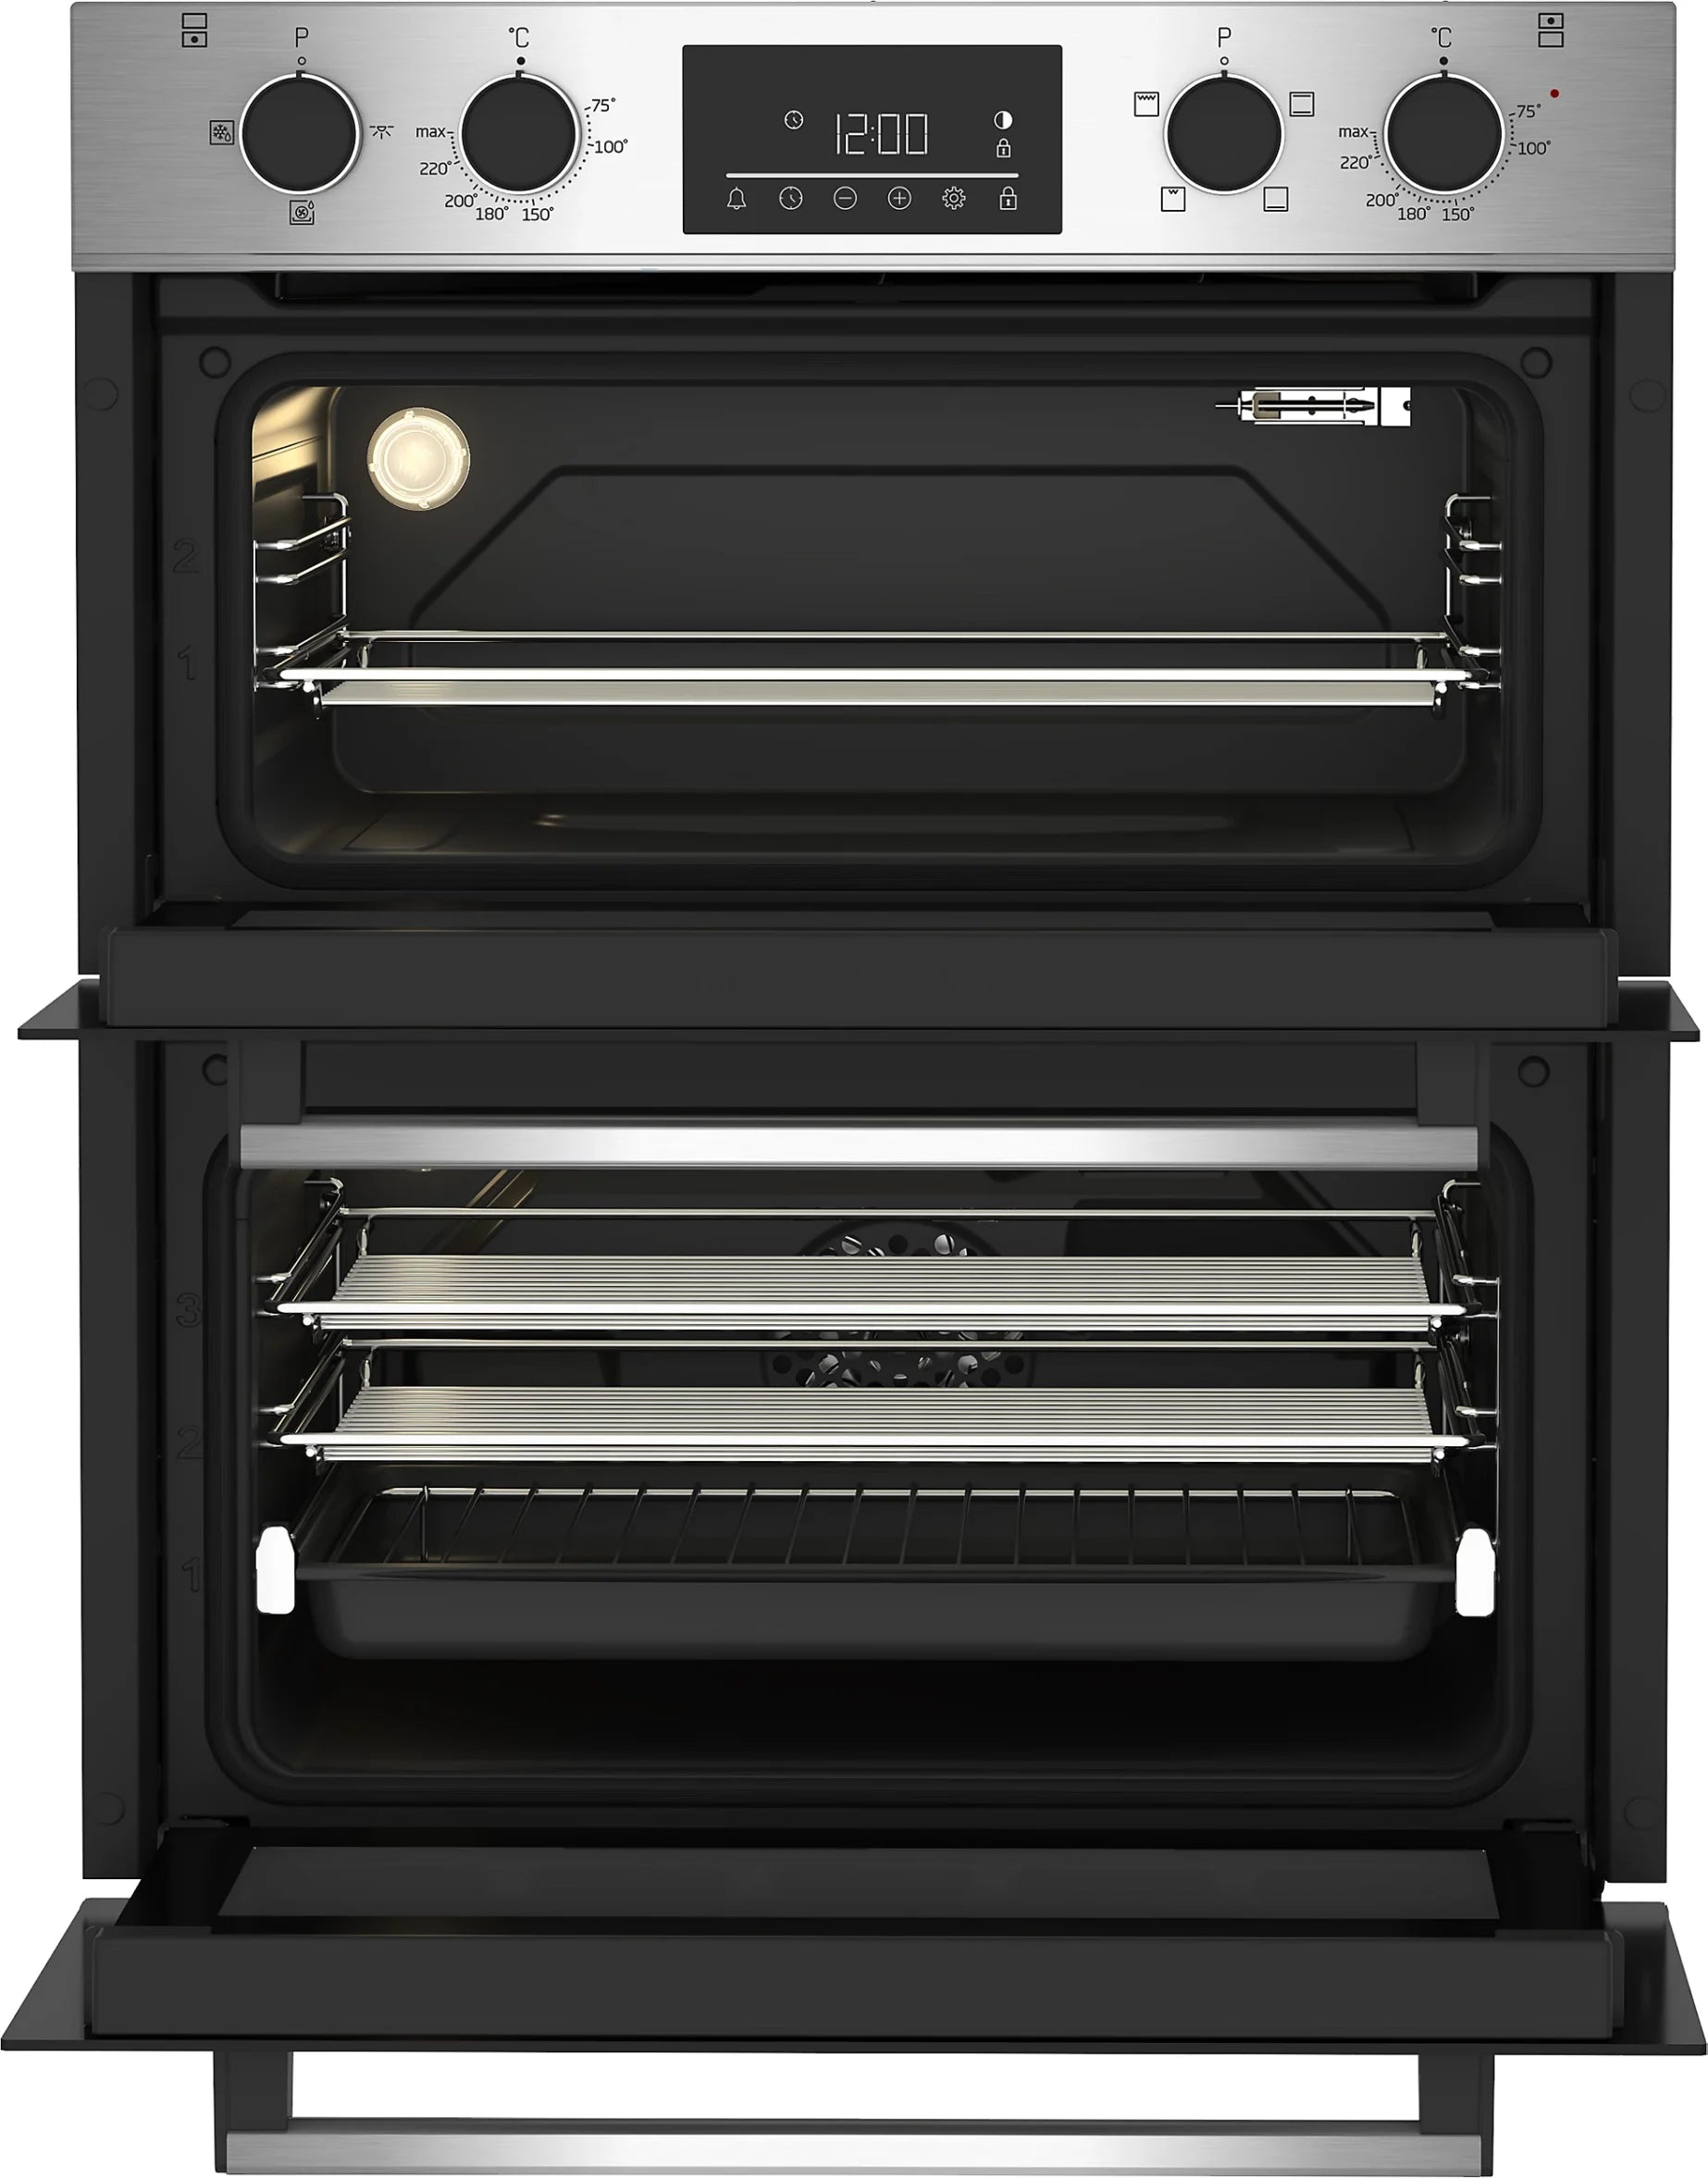 Beko BBTQF22300X Stainless Steel Built-in Double Oven X Display -7731